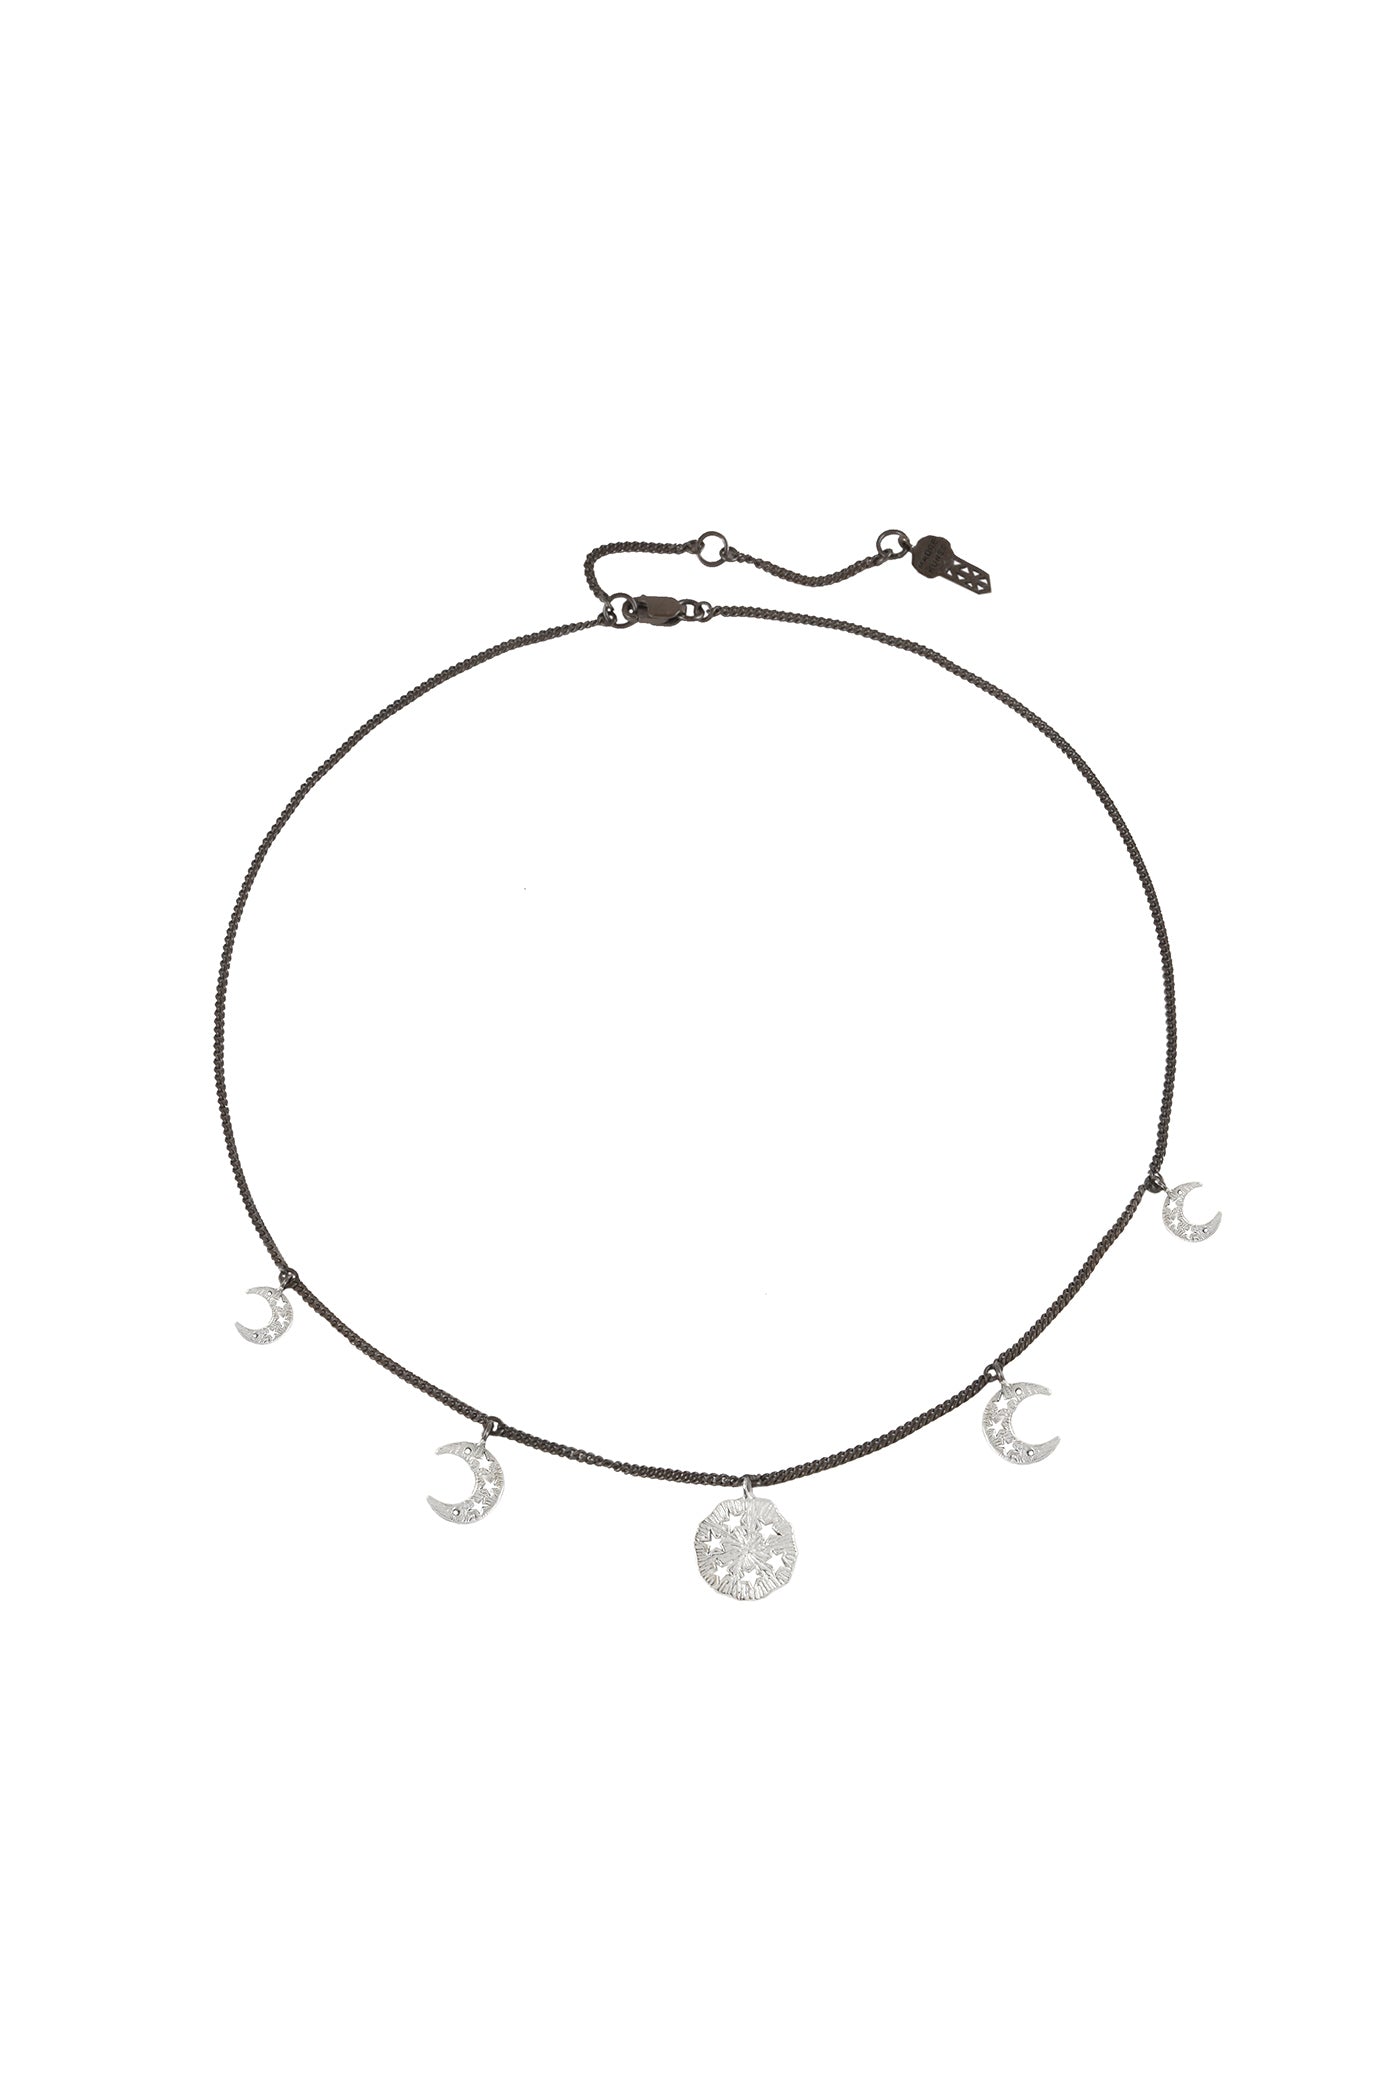 Moon cycle choker, 41 cm. Partly silver oxide